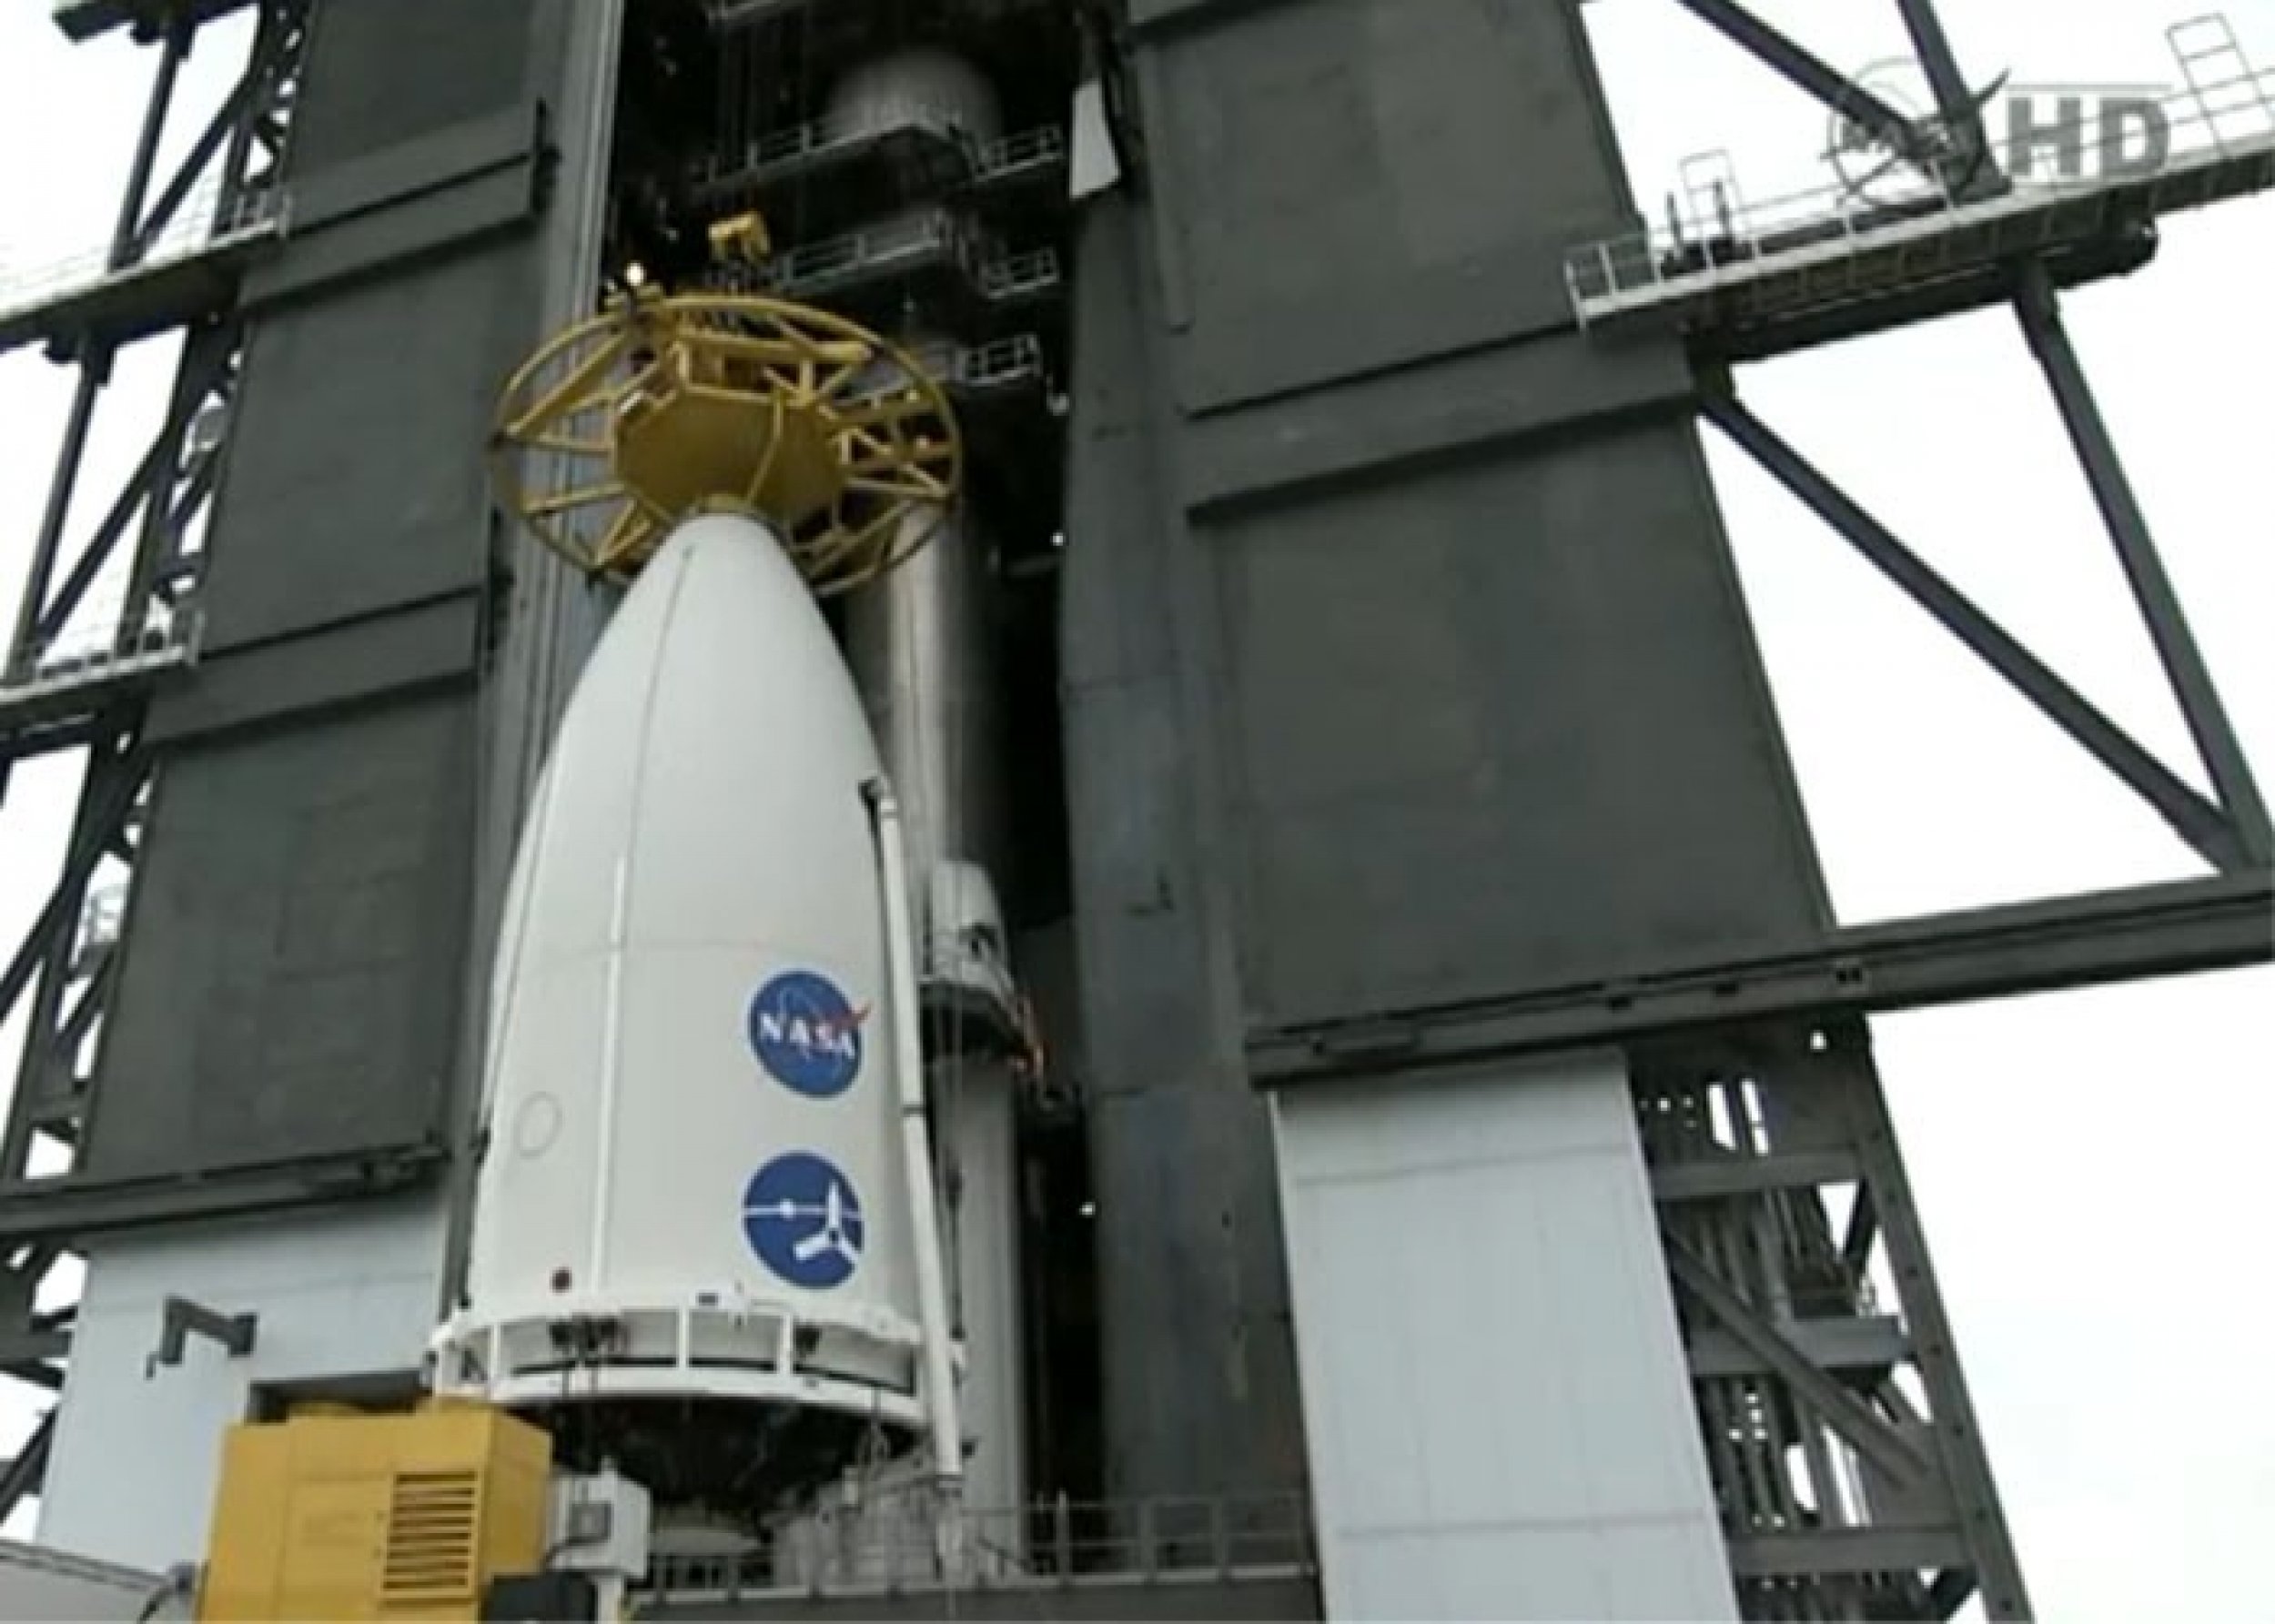 Jupiter probe Juno, which rests inside a part of Atlas V rocket, is being hoisted up the launch pad